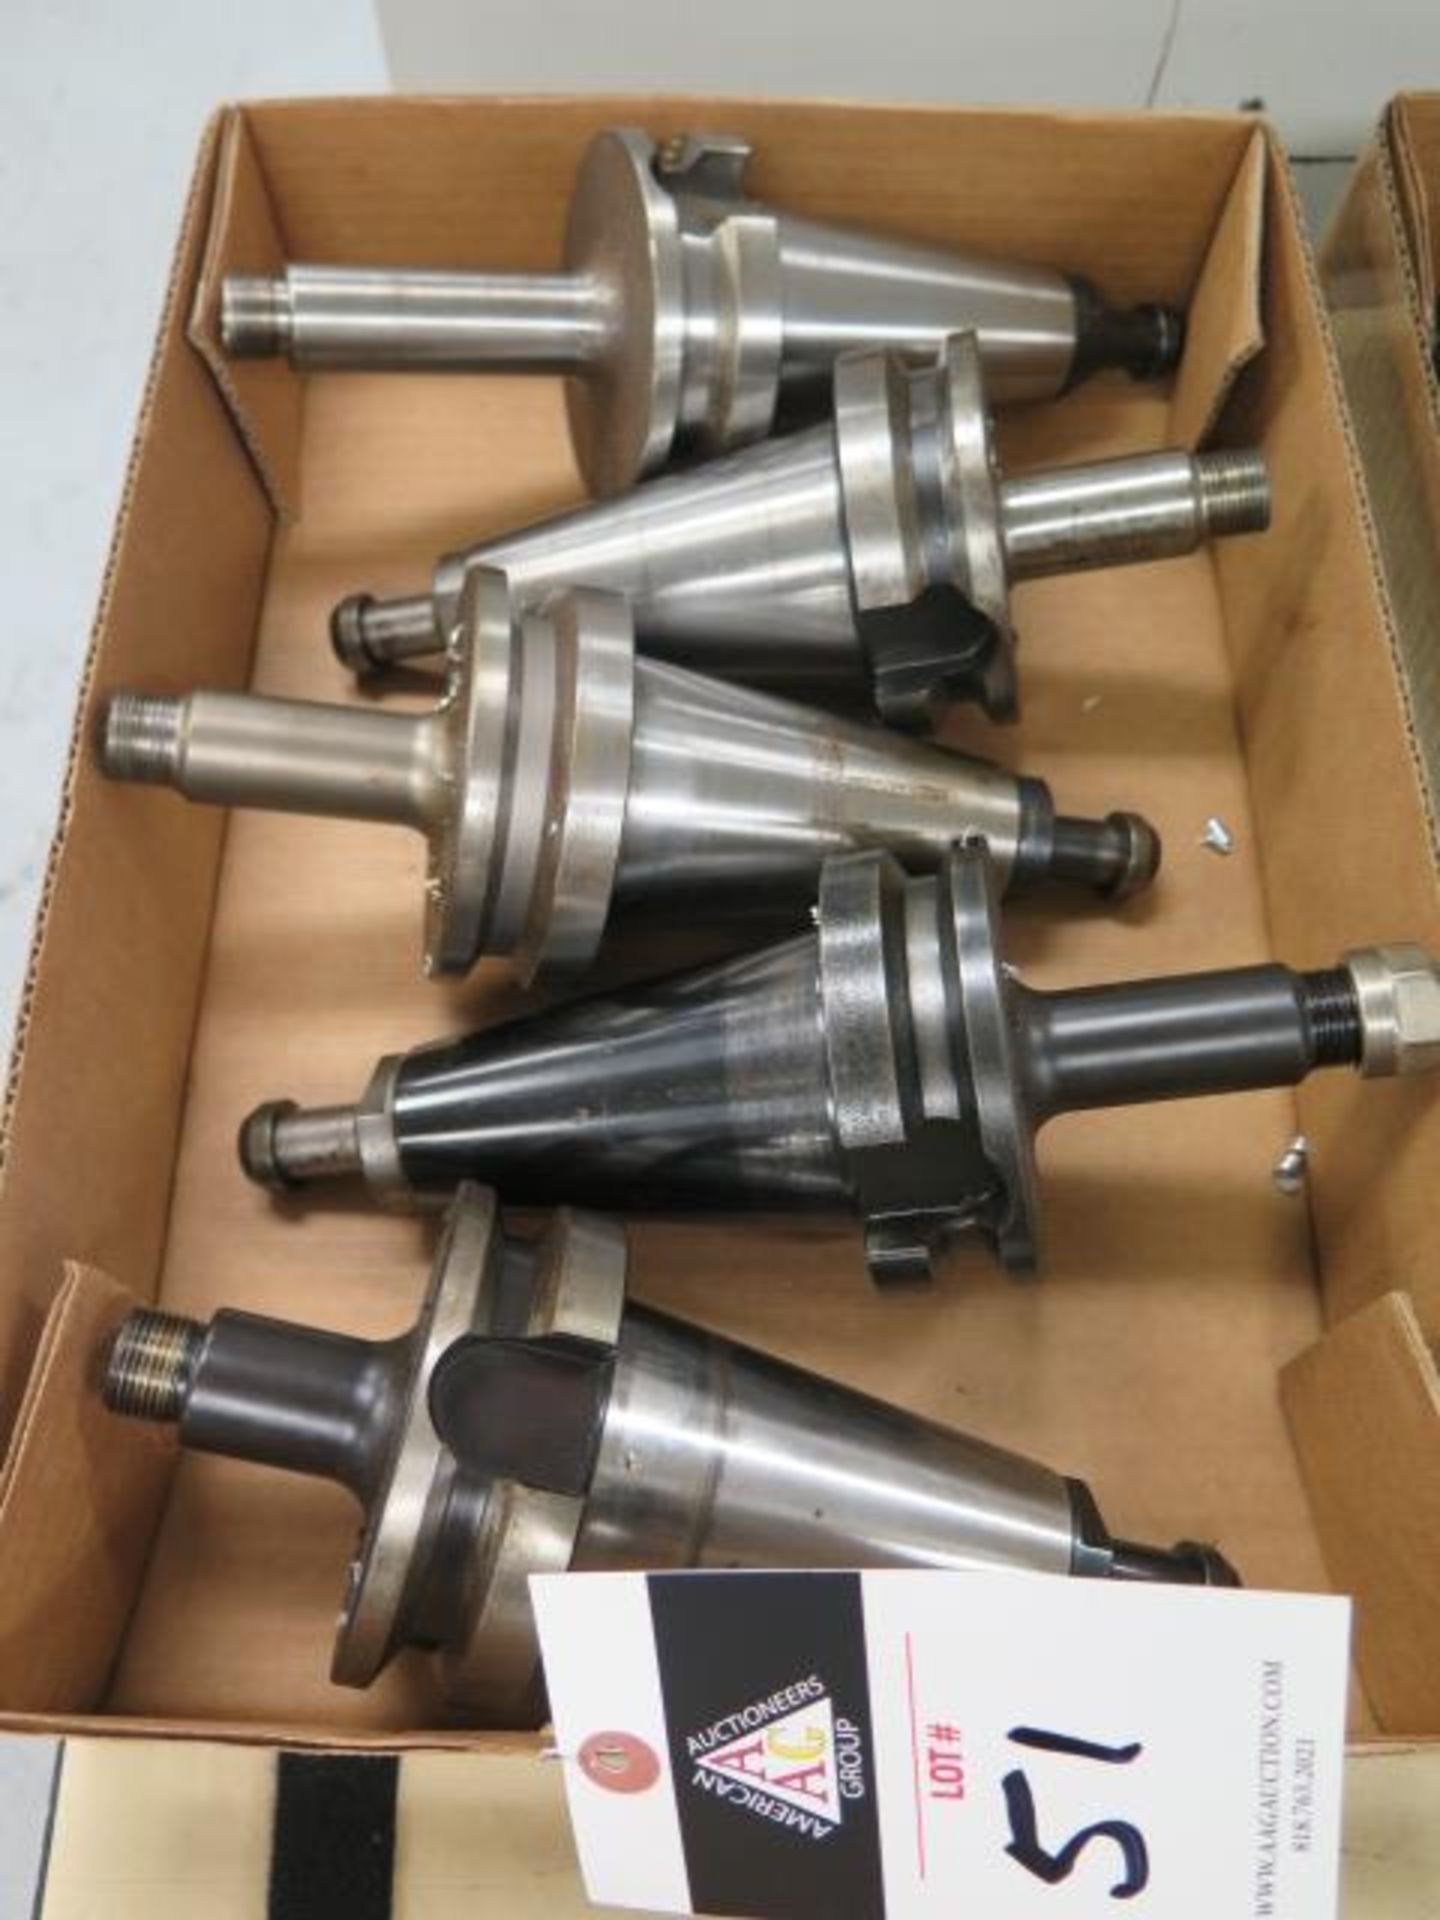 BT-50 Taper ER16 Collet chucks (5) (SOLD AS-IS - NO WARRANTY) (Located @ 2229 Ringwood Ave. San Jose